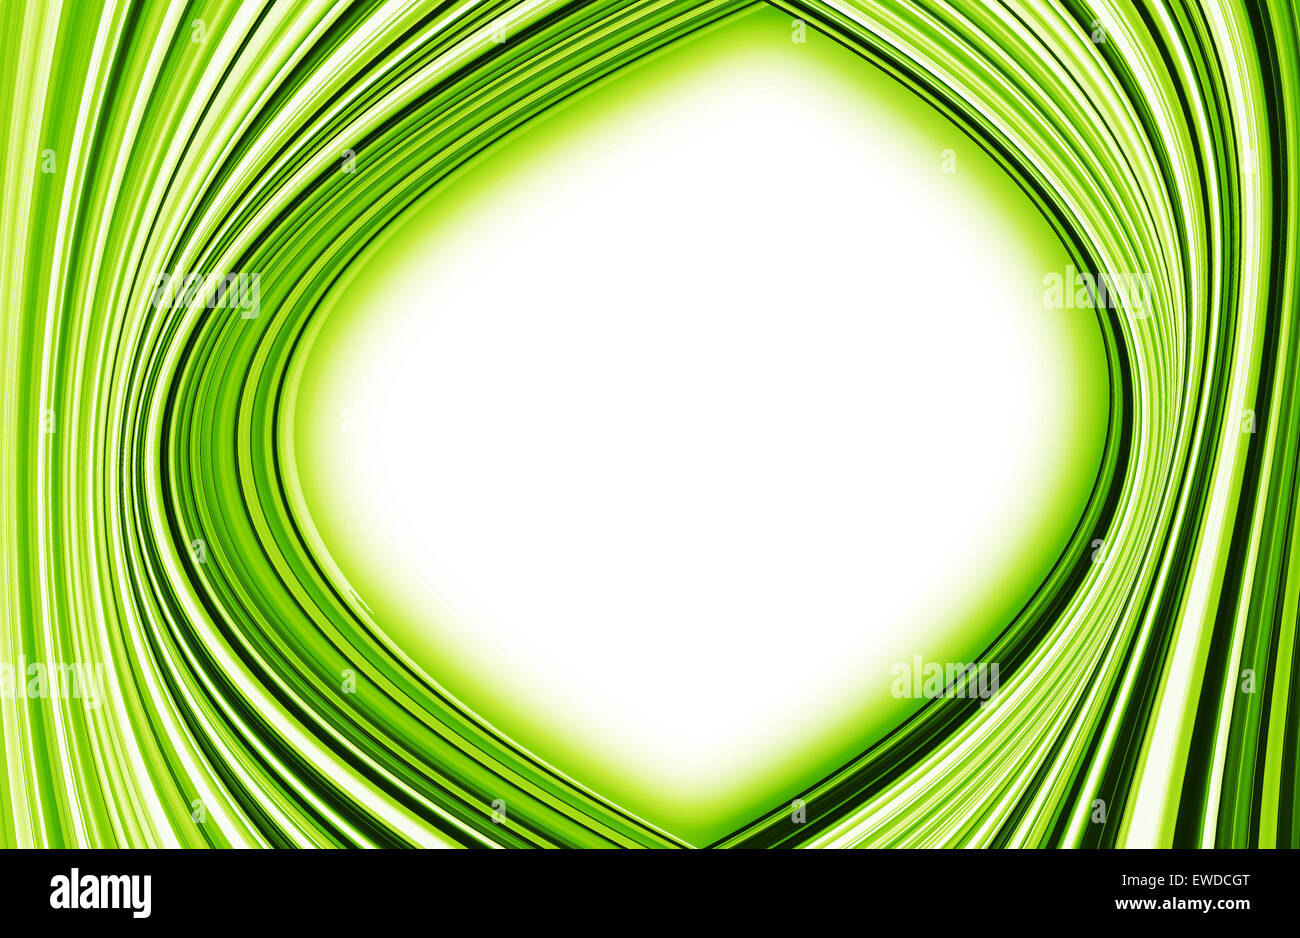 599,743 Green White Gradient Images, Stock Photos, 3D objects, & Vectors